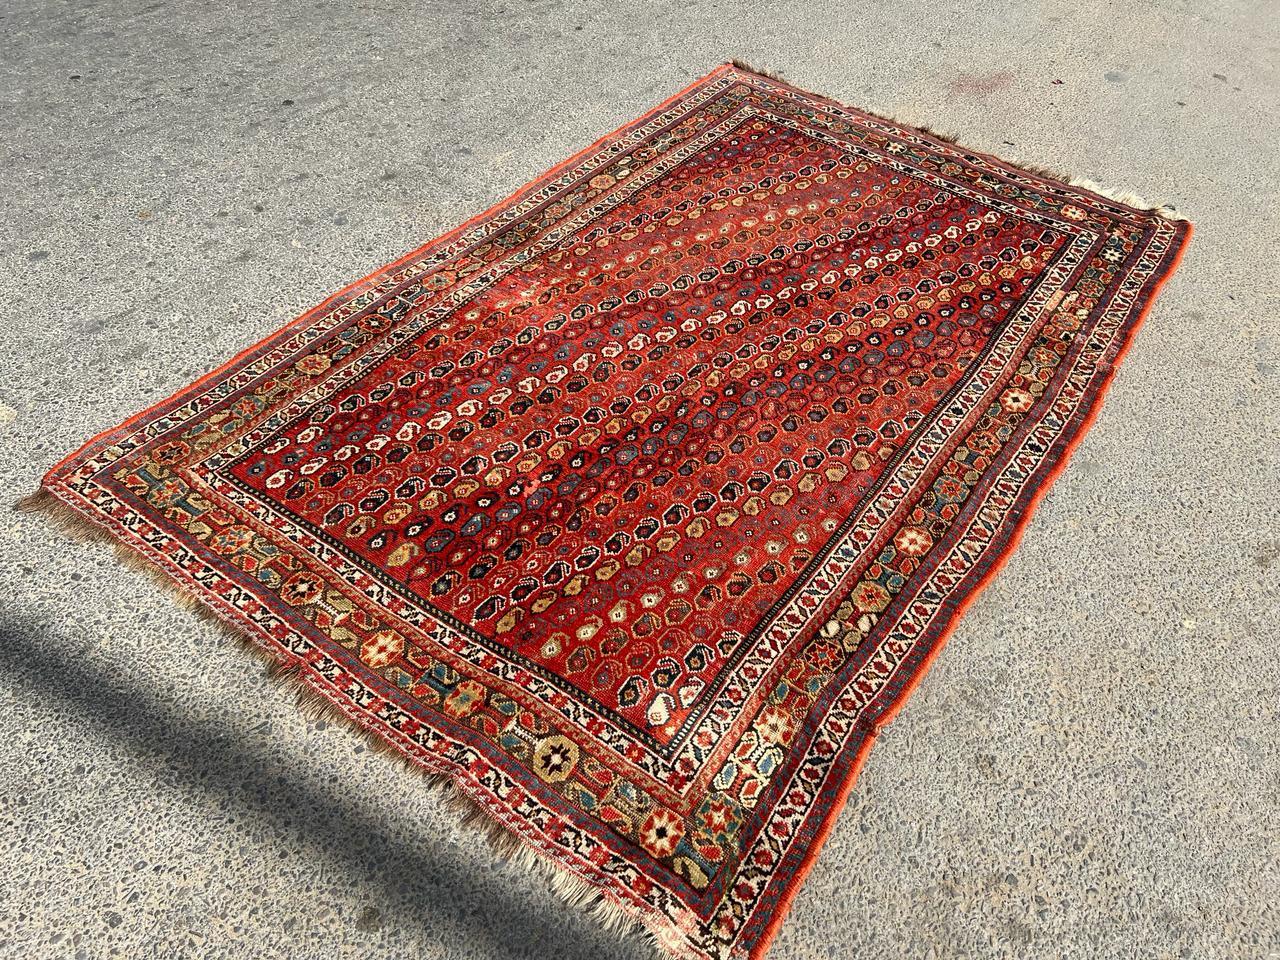 Step into the timeless allure of Persian craftsmanship with this Handmade Antique Persian Khamseh Rug from the 1900s. Measuring 5.1 feet in width and 8.5 feet in length (155cm x 259cm), this captivating rug features a vibrant red color palette that